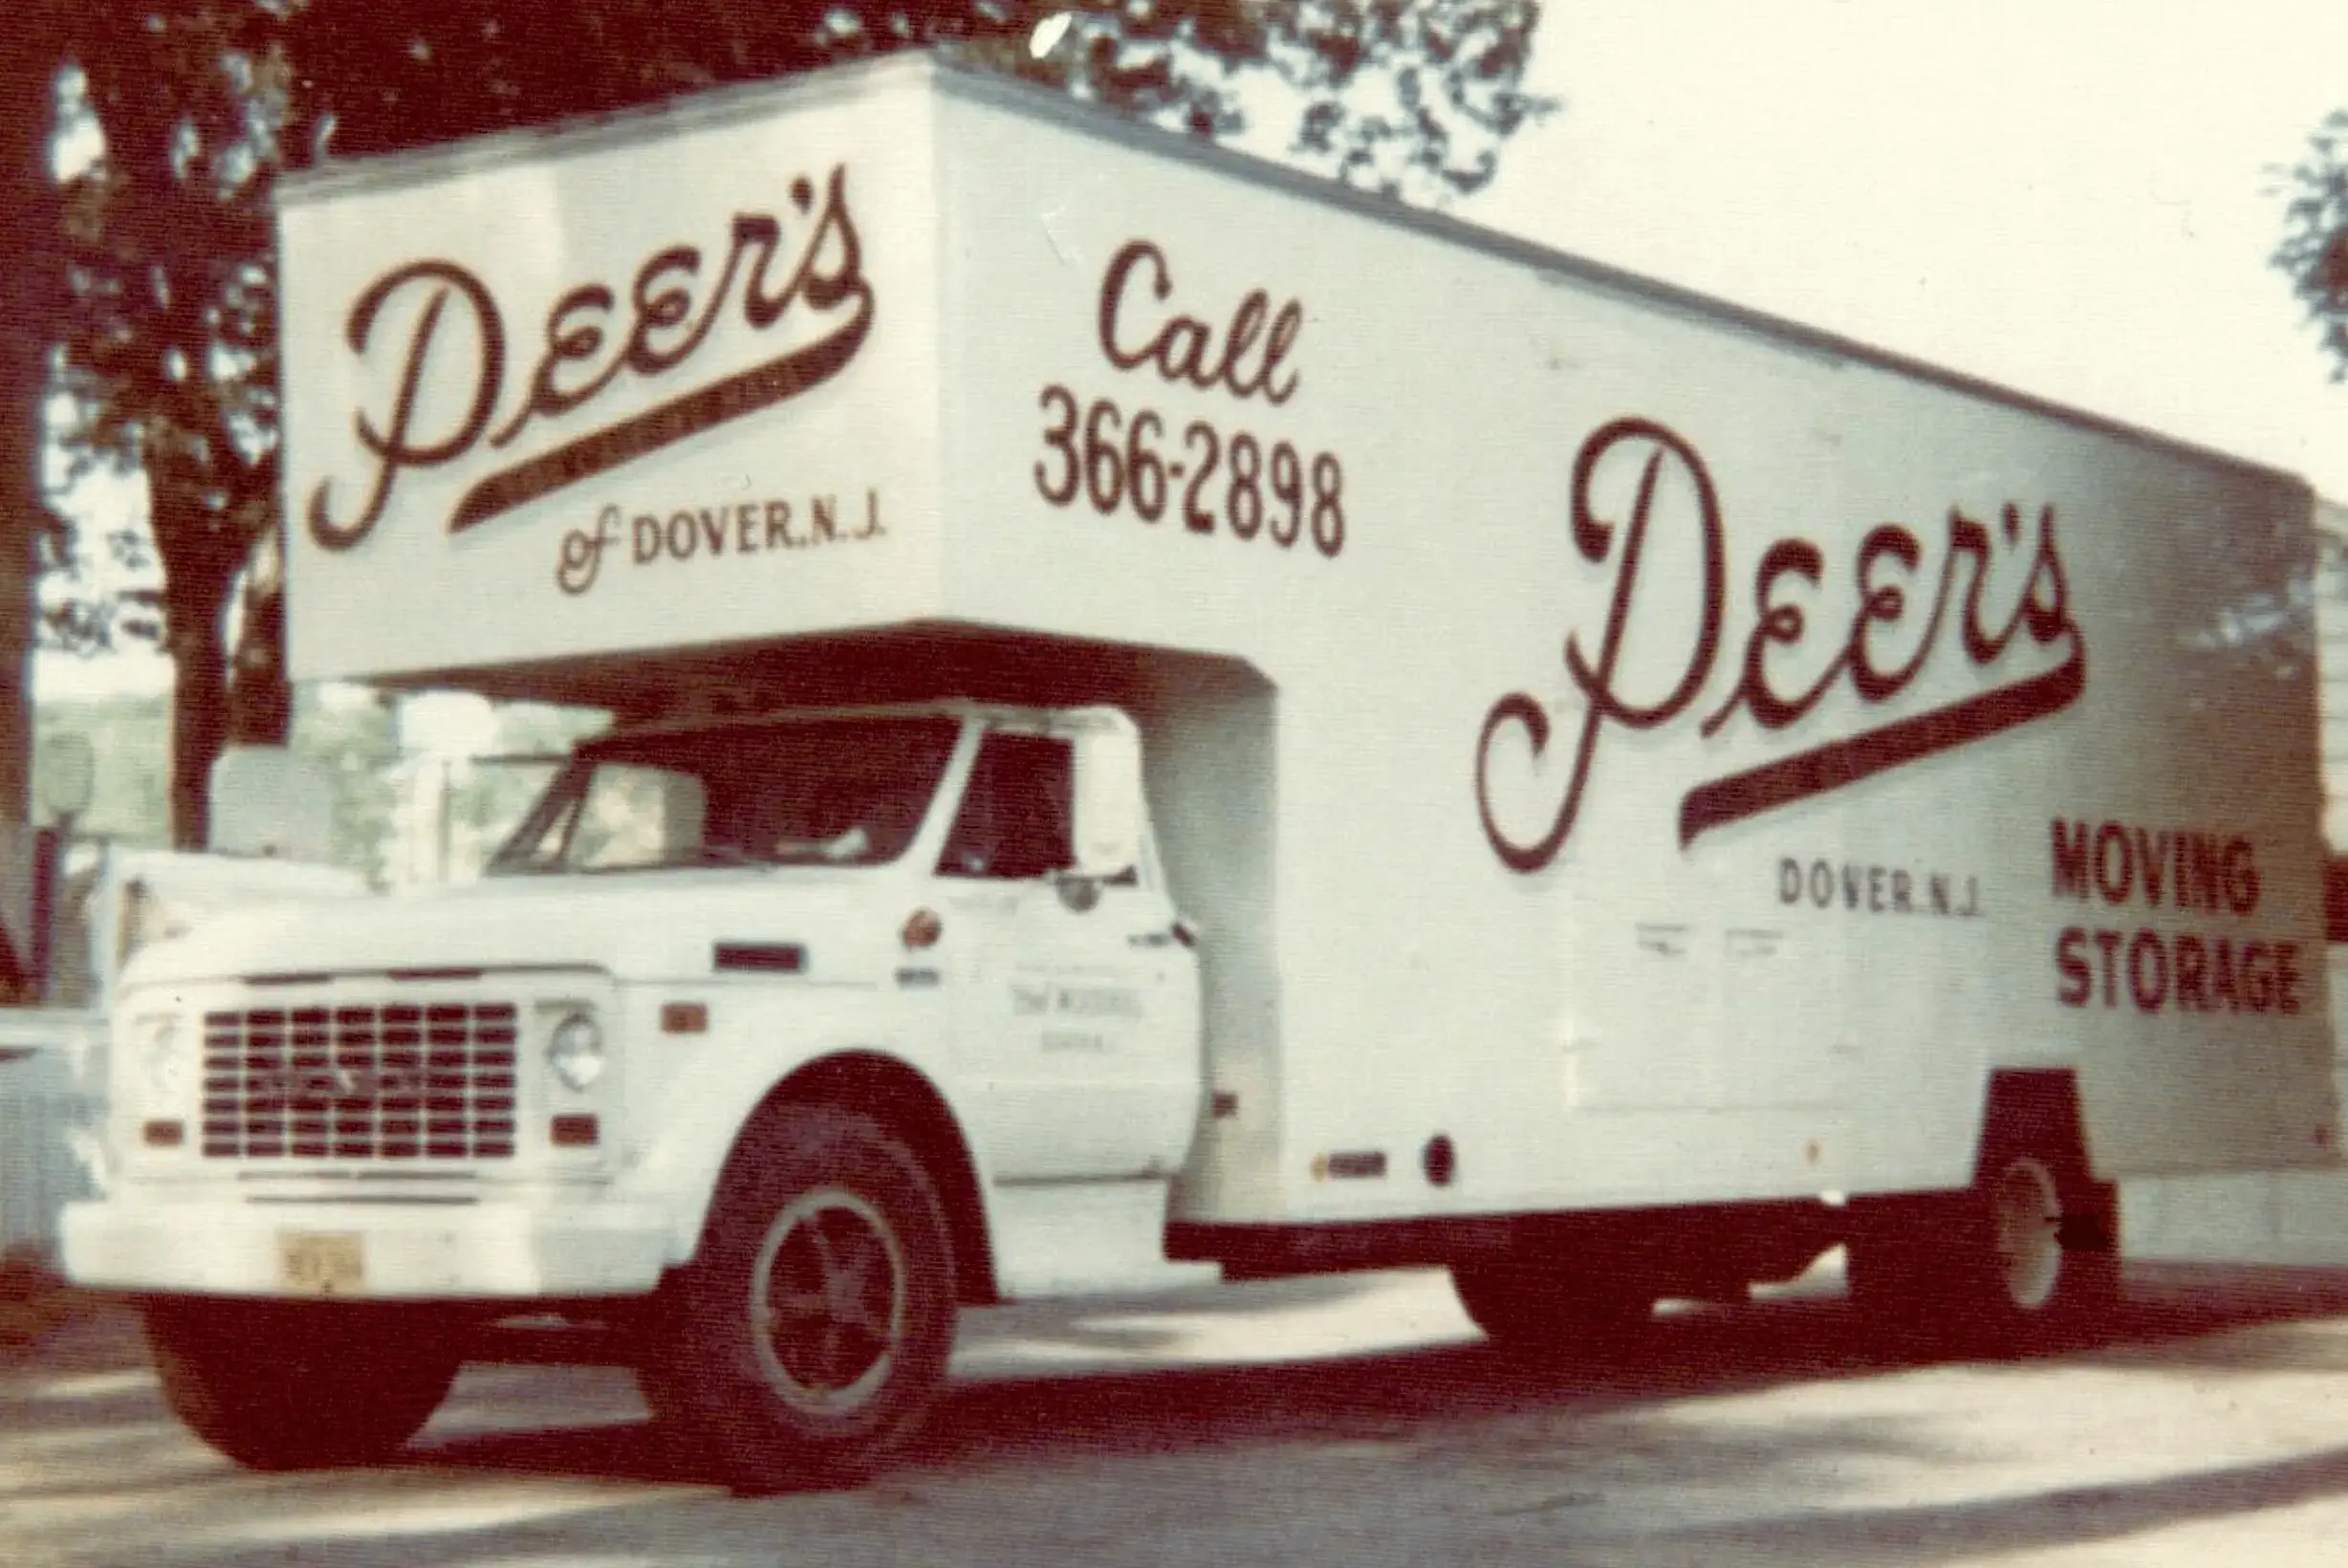 Peers Moving Co Inc Moving Truck 1973 Dover, NJ Morris County Movers